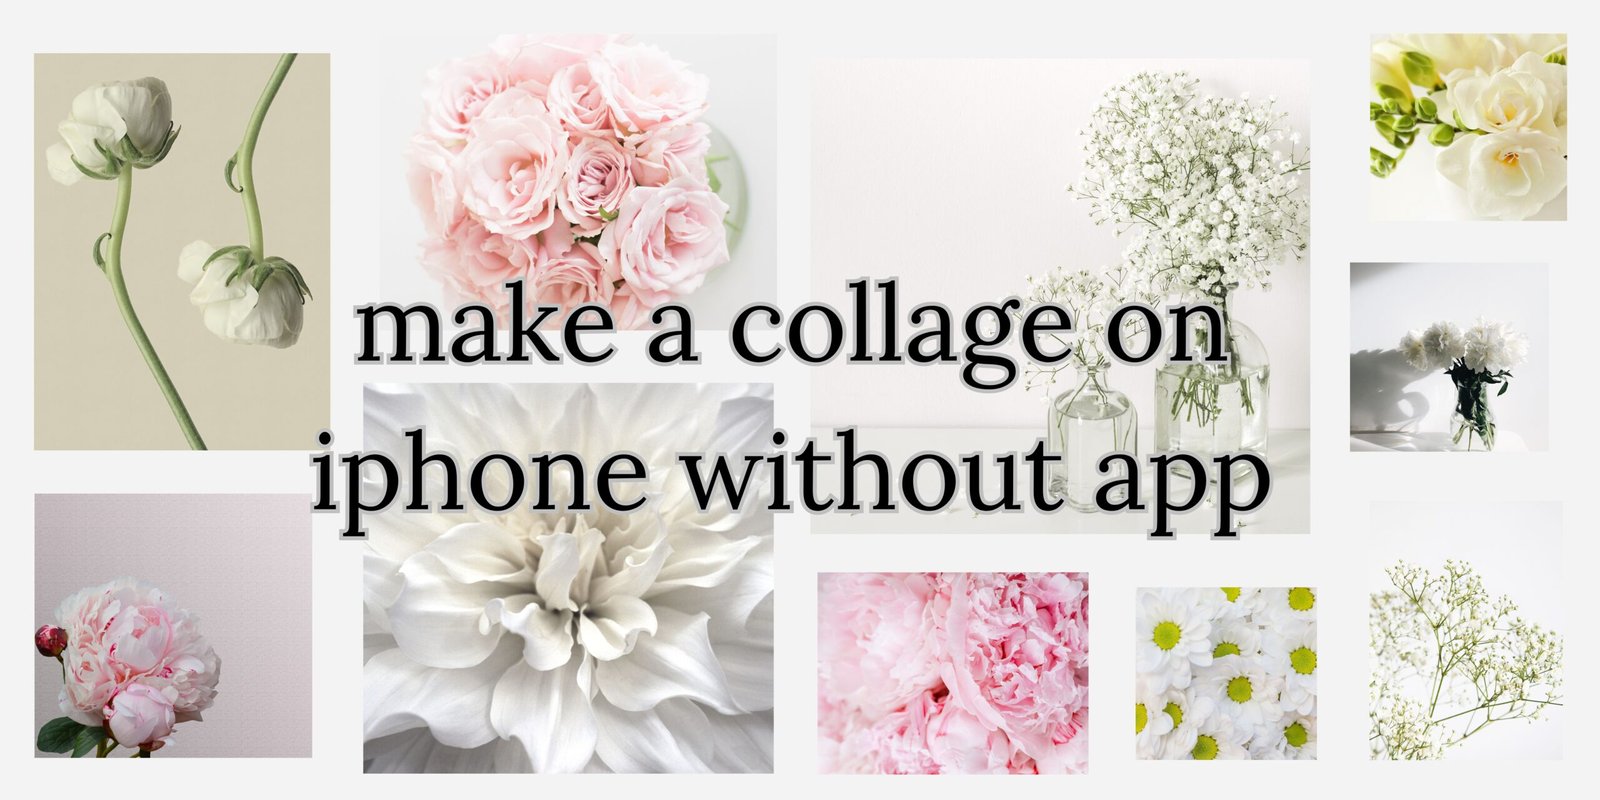 make a collage on iPhone without app